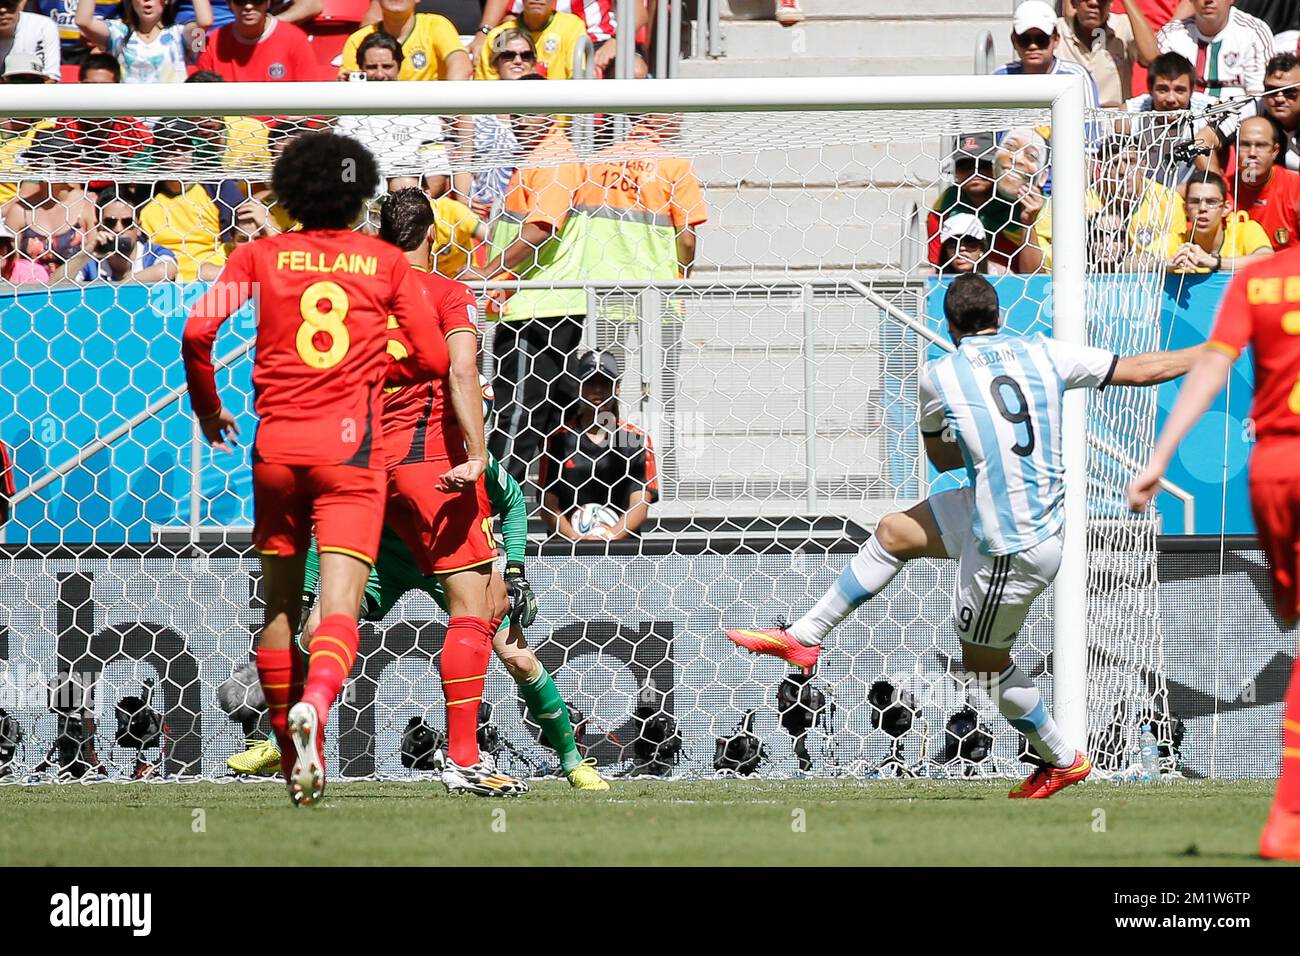 Argentina's Gonzalo Higuain scores the 1-0 goal during the quarter final match between Belgian national soccer team Red Devils and Argentina, in Estadio Nacional Mane Garrincha, in Brasilia, Brazil, during the 2014 FIFA World Cup, Saturday 05 July 2014. BELGA PHOTO BRUNO FAHY Stock Photo